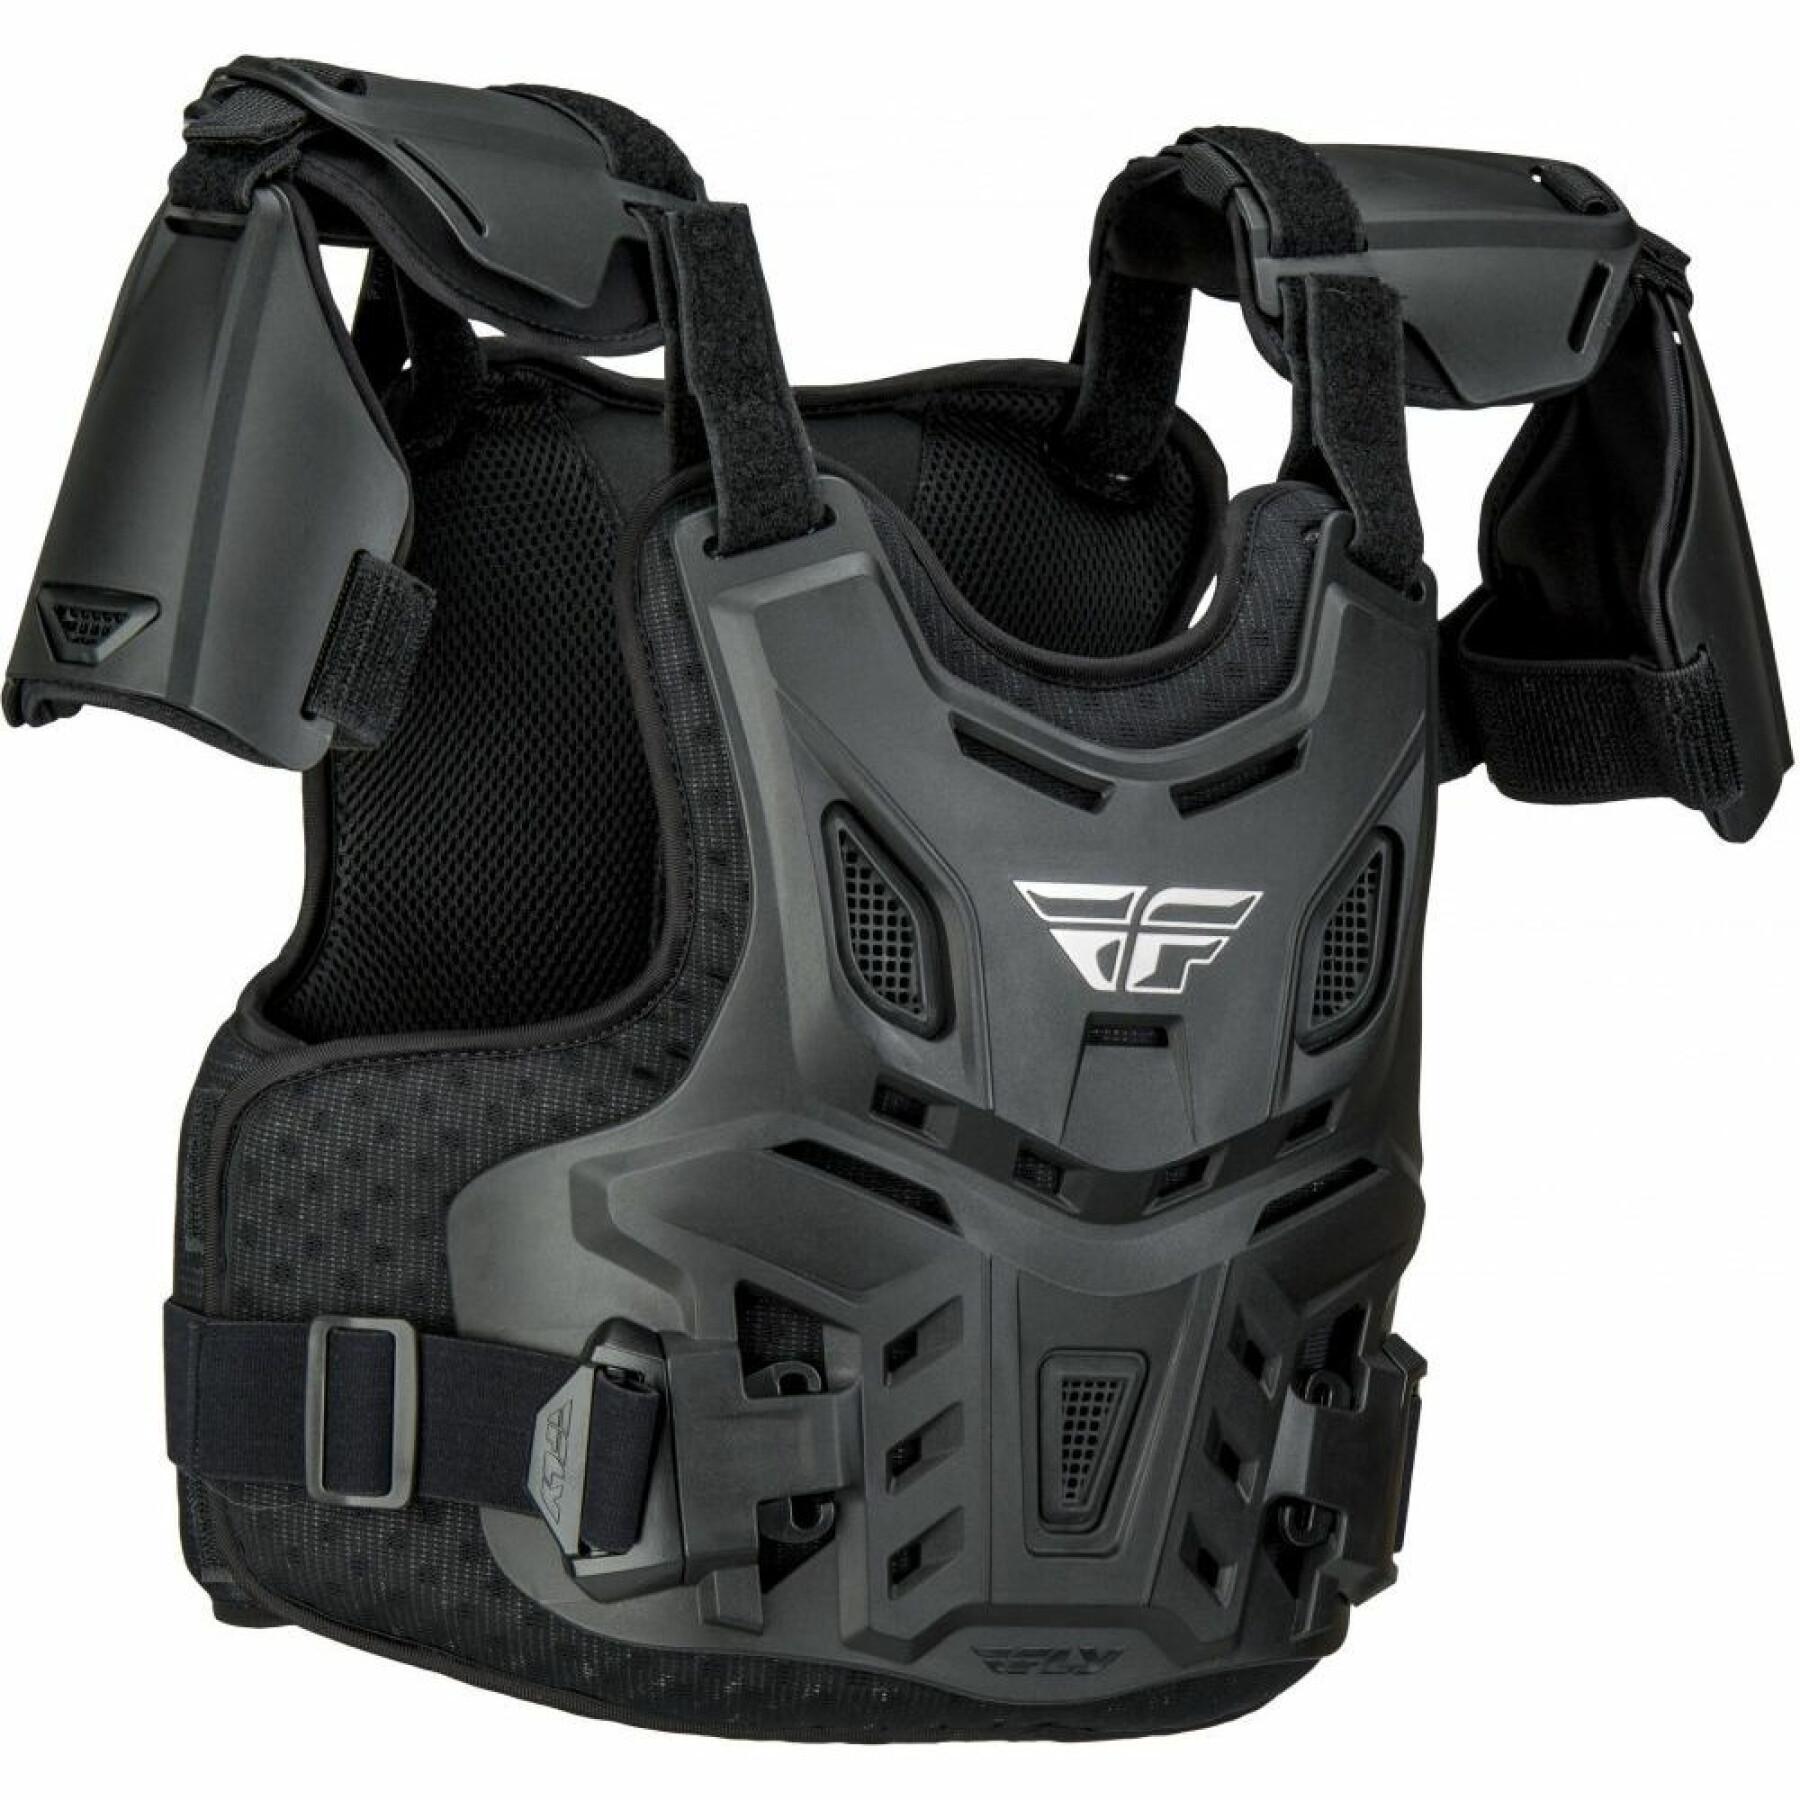 Children's chest protector Fly Racing Revel Roost